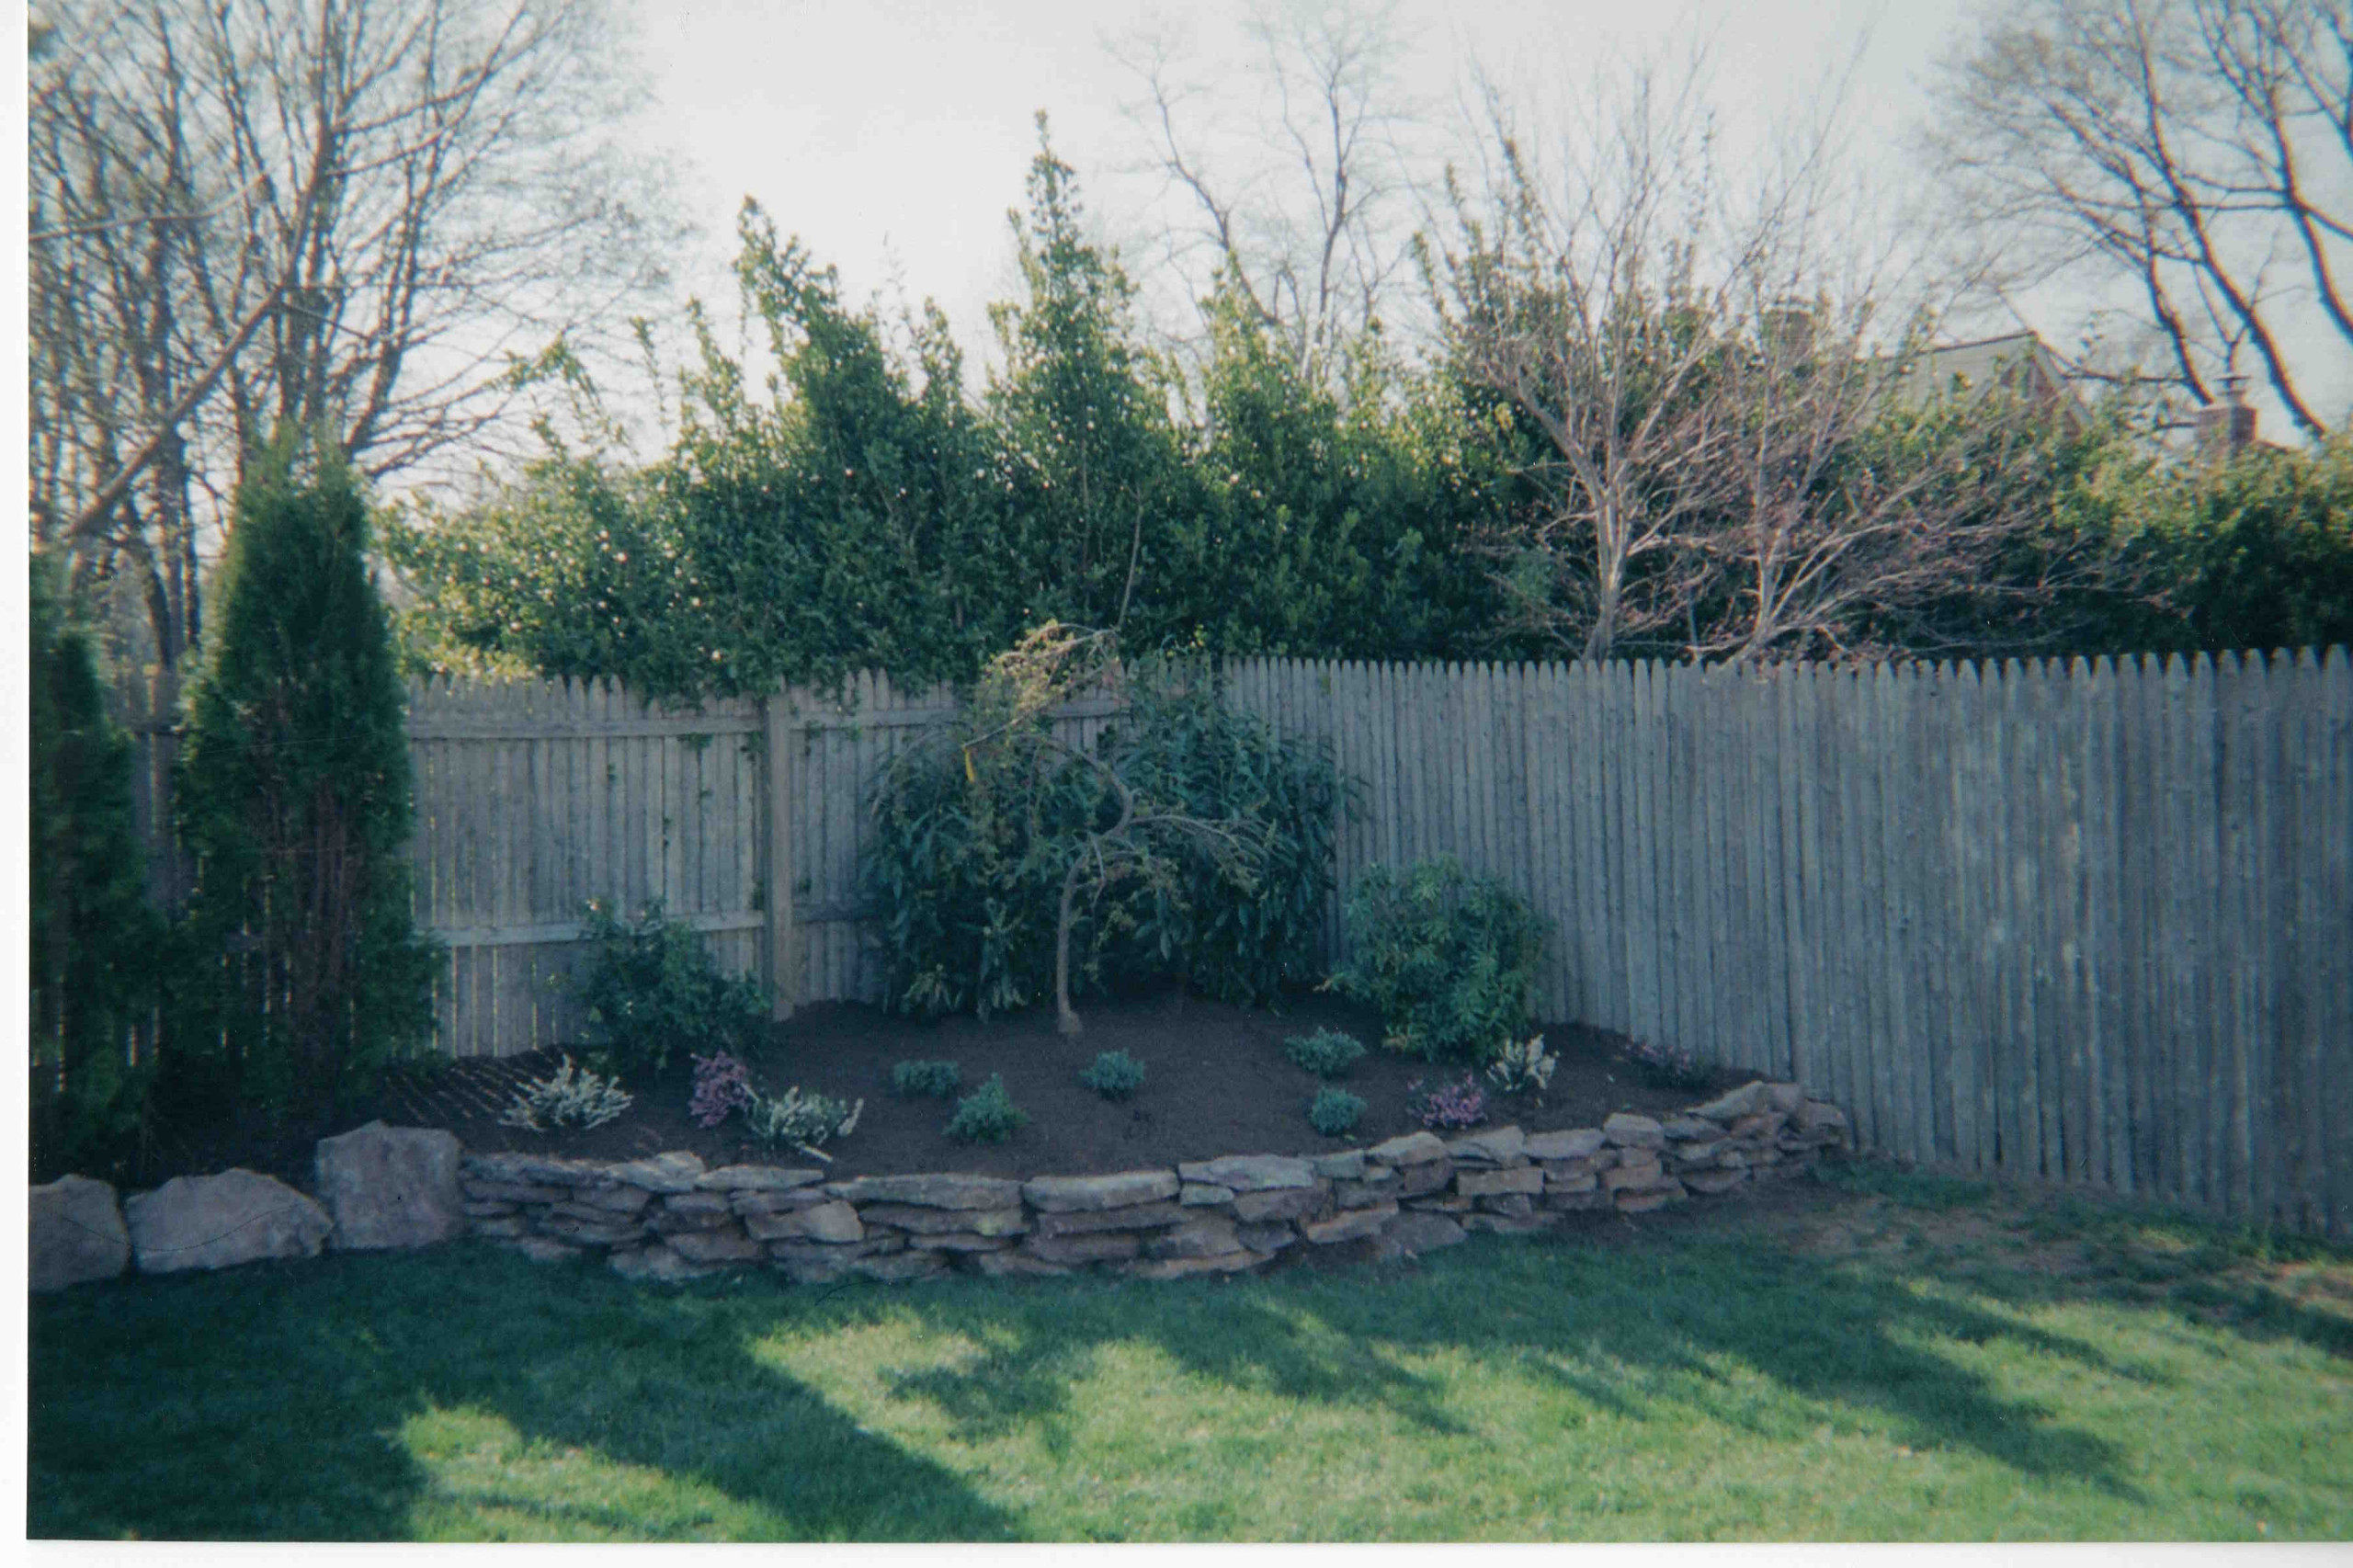 Rock Wall and small planting